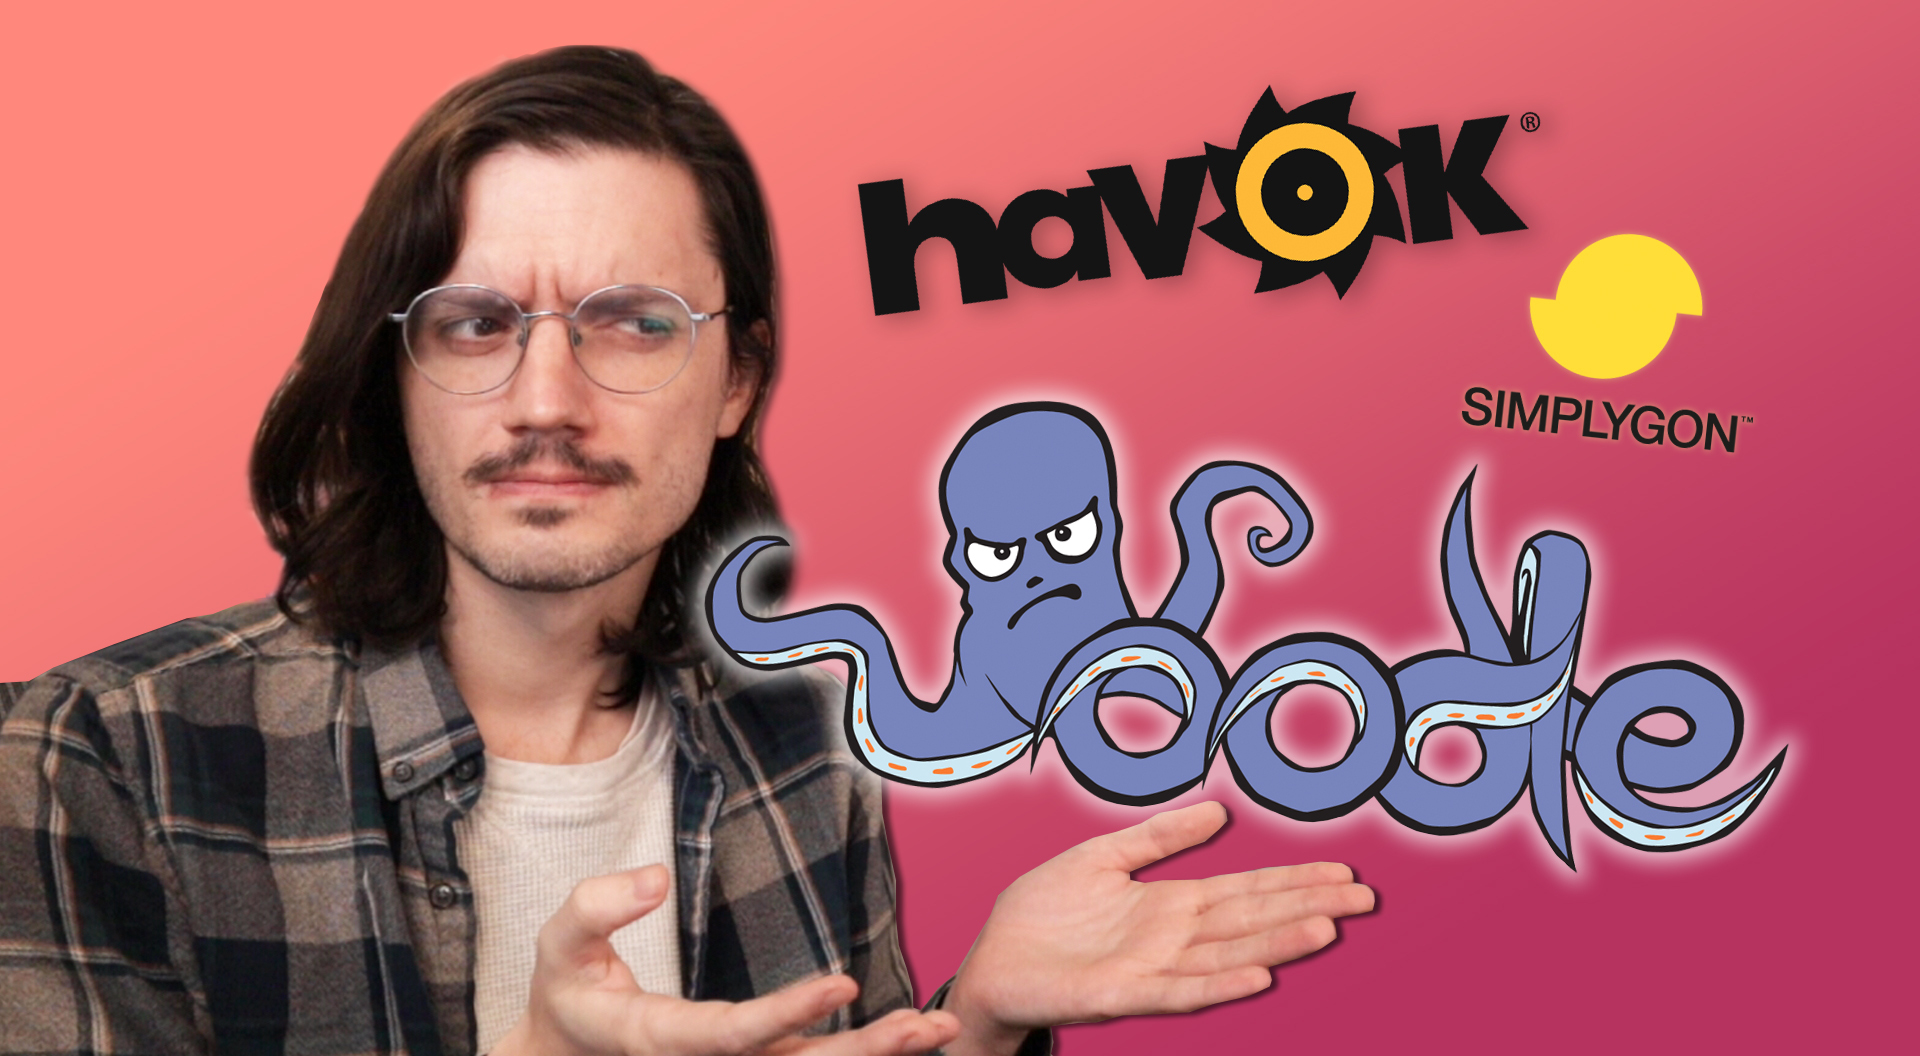 Polygon video producer Patrick Gill makes a stupid youtube thumbnail face while gesturing towards the logos for game middleware tools Oodle, Havok, and Simplygon